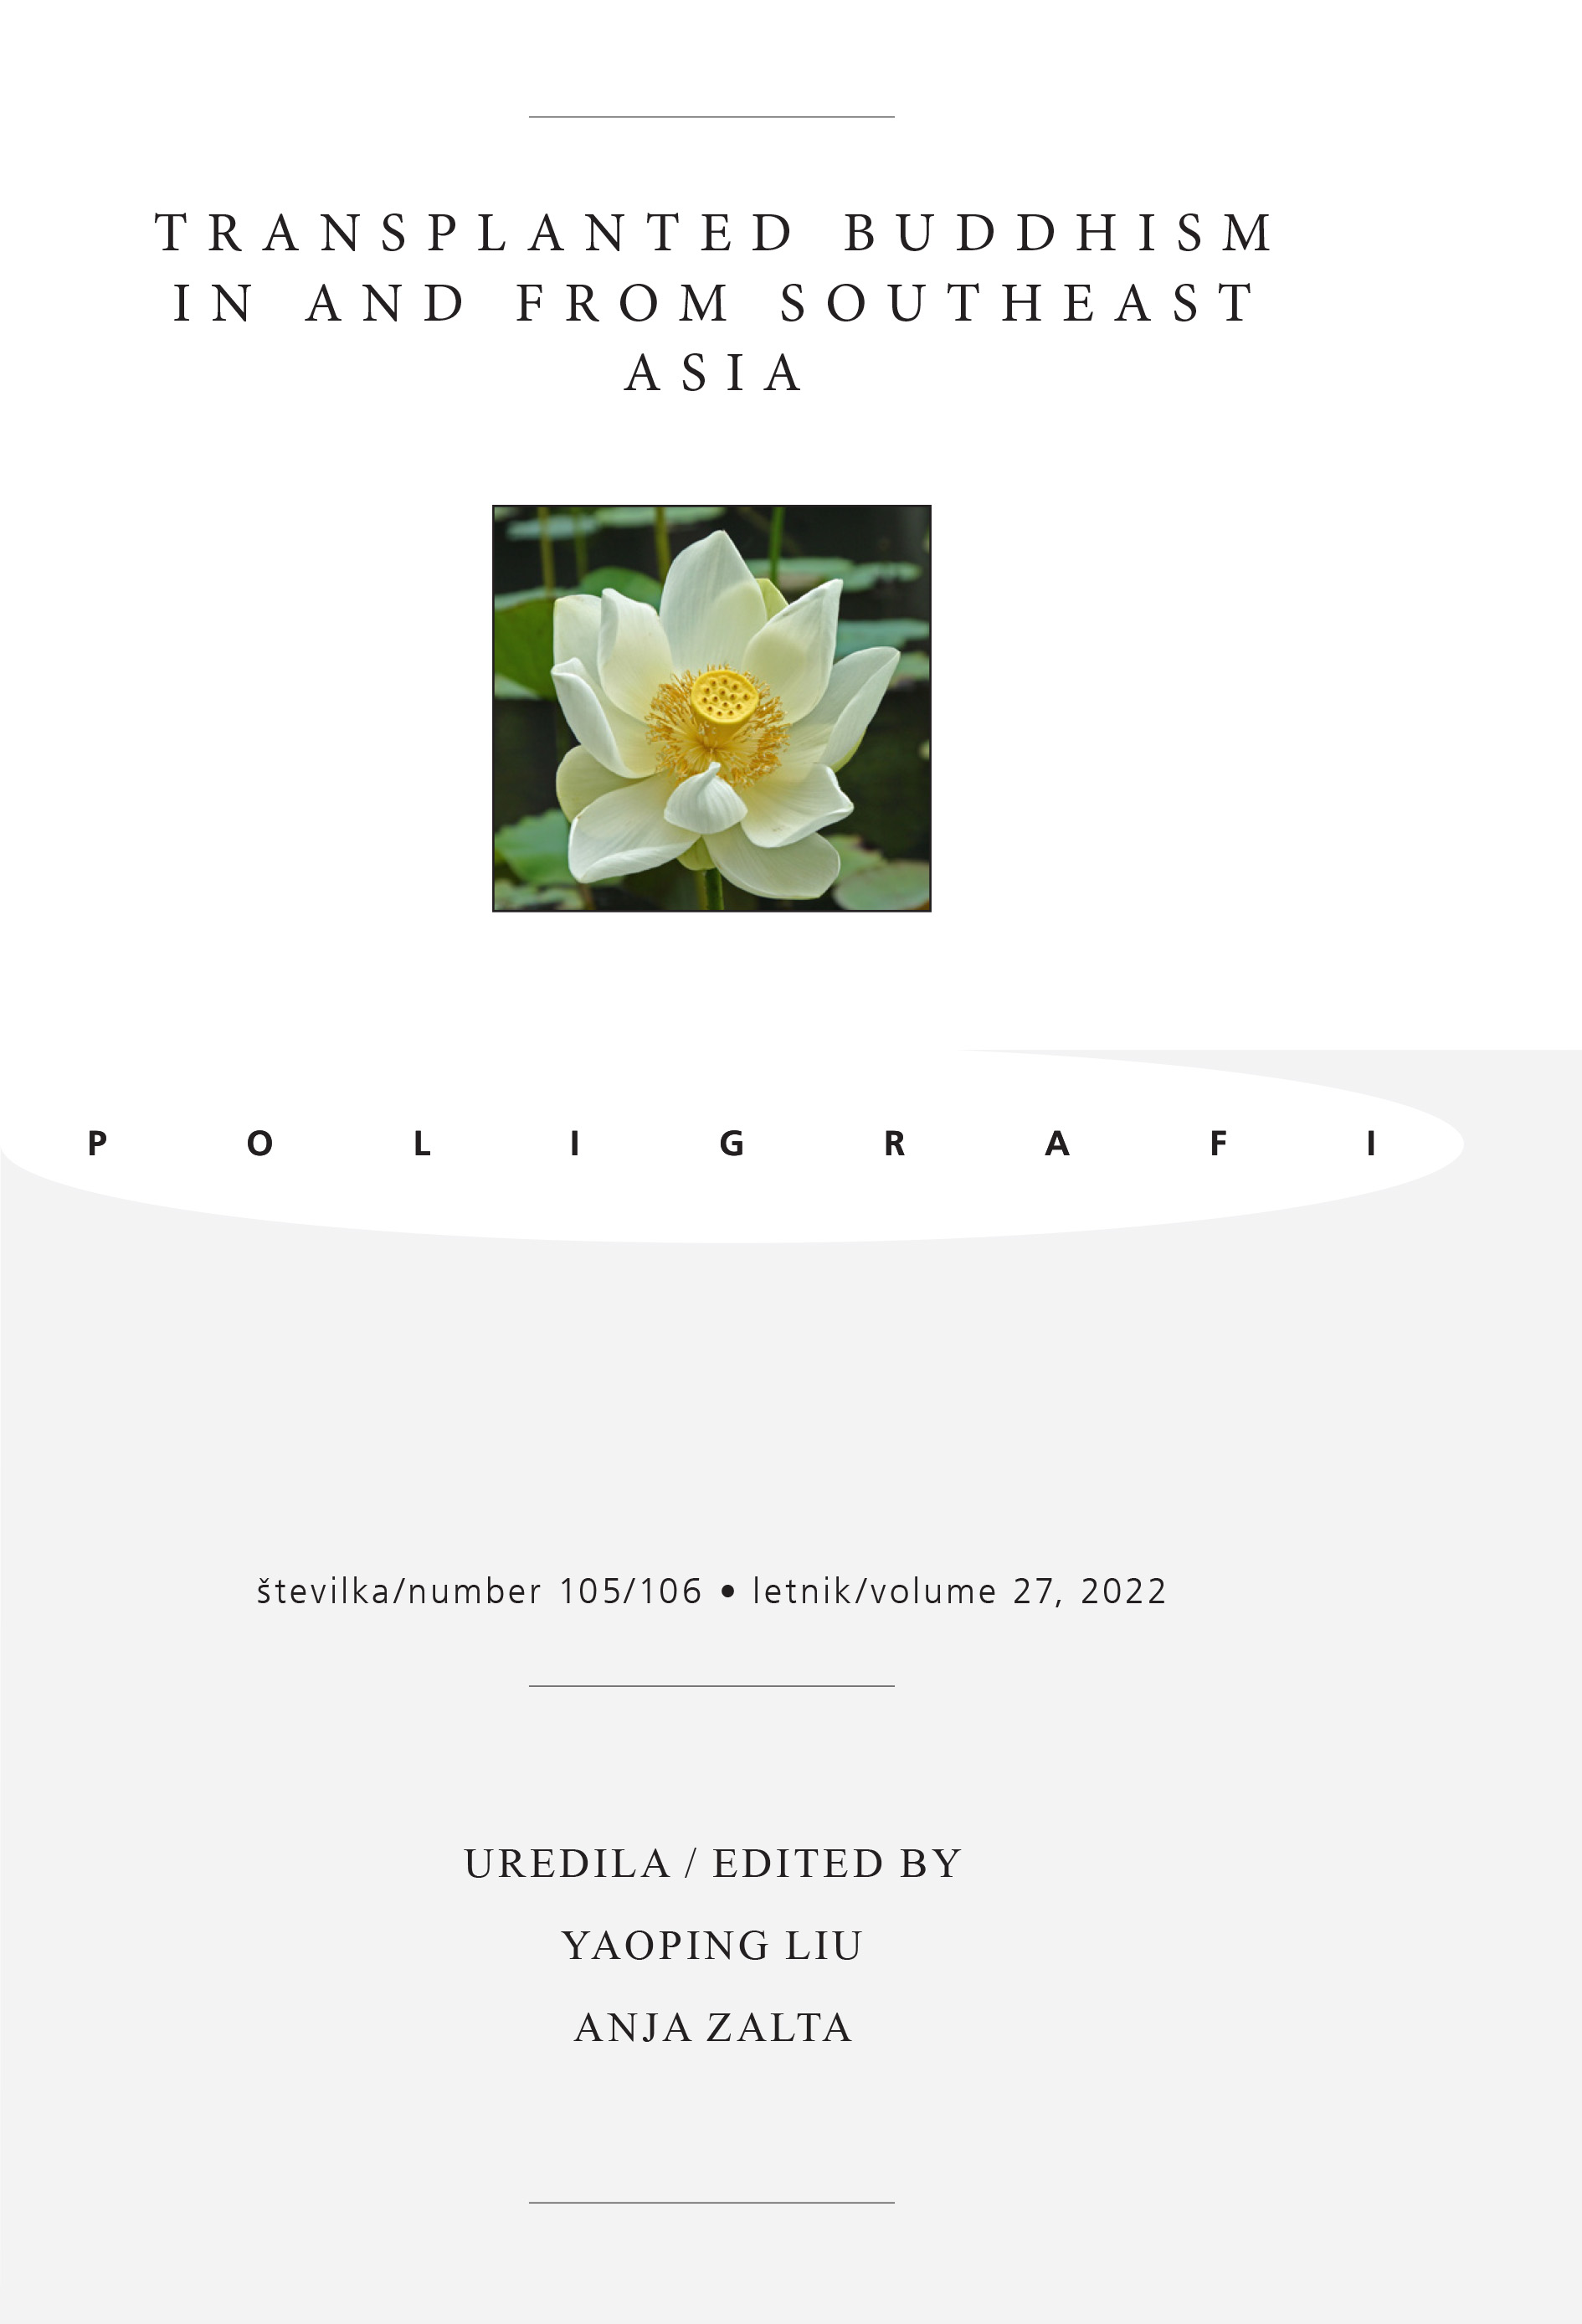 					Poglej Letn. 27 Št. 105/106 (2022): Transplanted Buddhism in and from Southeast Asia
				